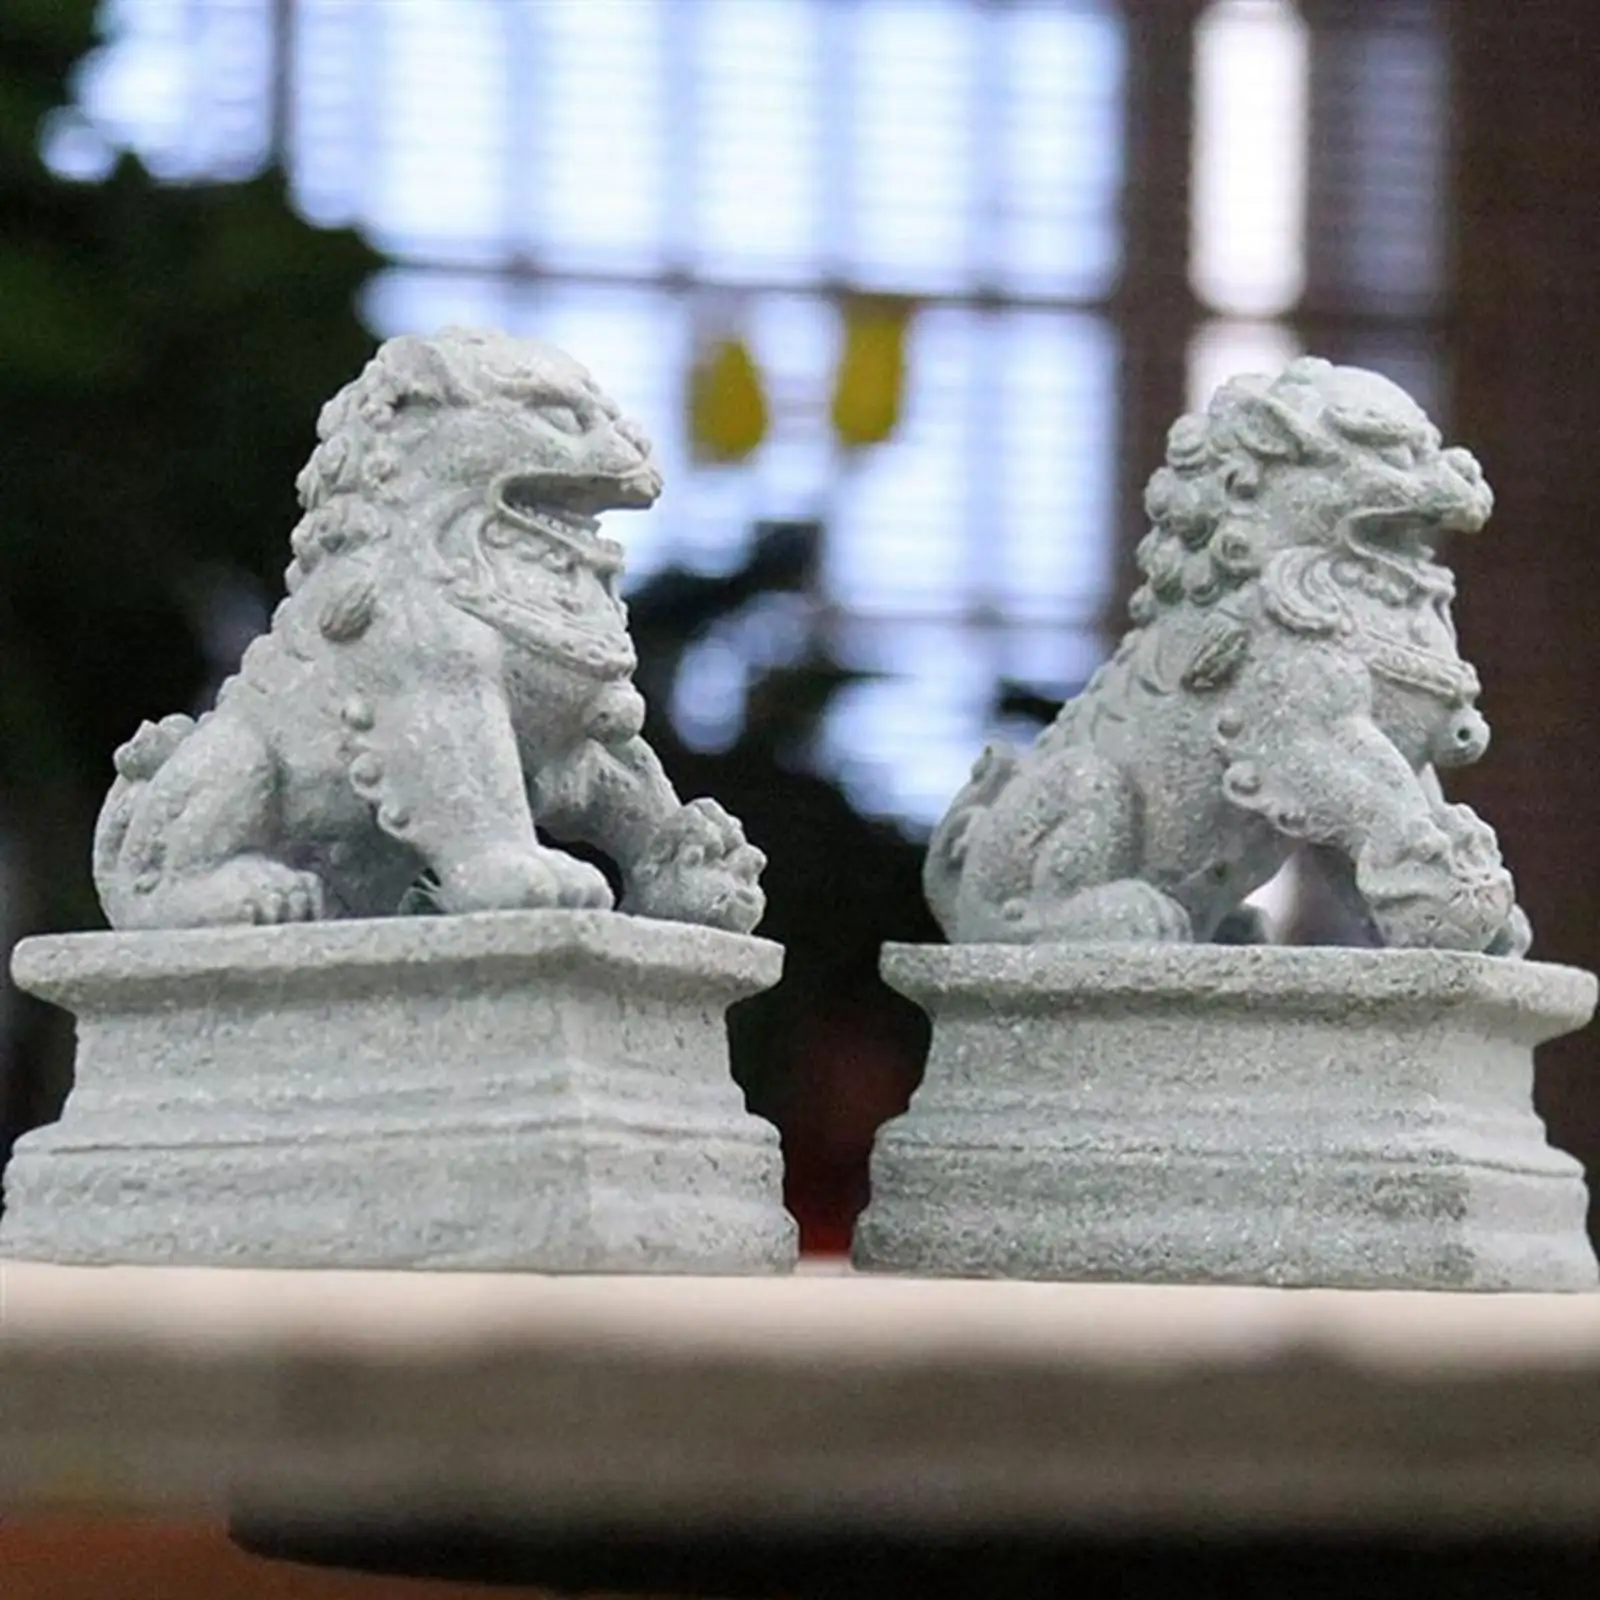 2Pcs Asian Style Lions Statues Garden Sculptures Home Decoration Ornaments for Balcony Lawn Pathway Yard Patio